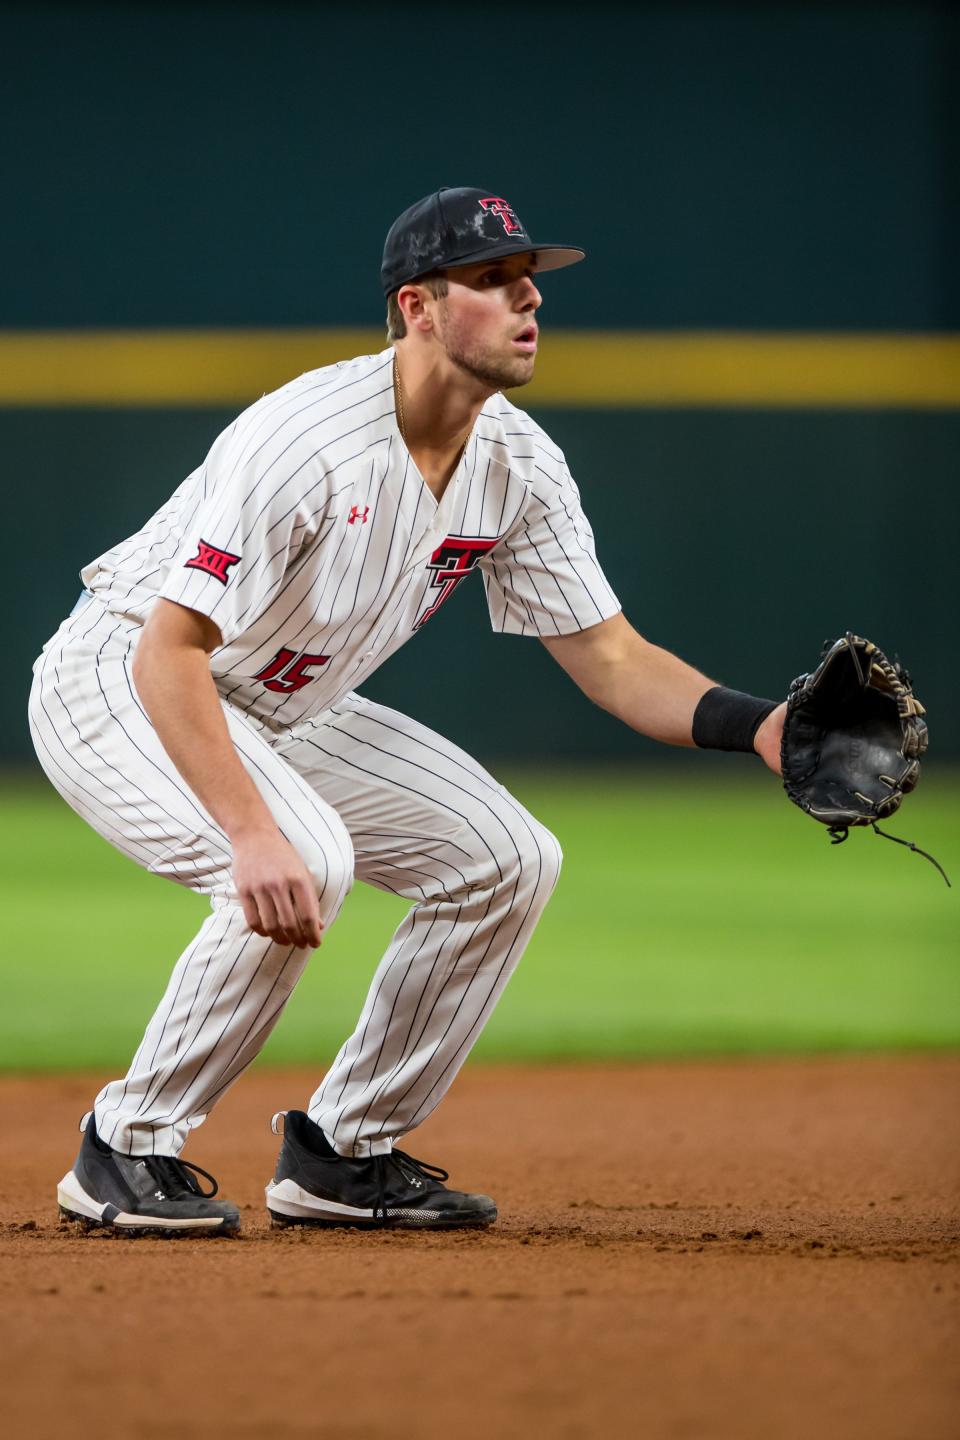 Texas Tech's Parker Kelly is among the Big 12 leaders with six home runs and 27 runs batted in this season, both already career bests for the senior third baseman.